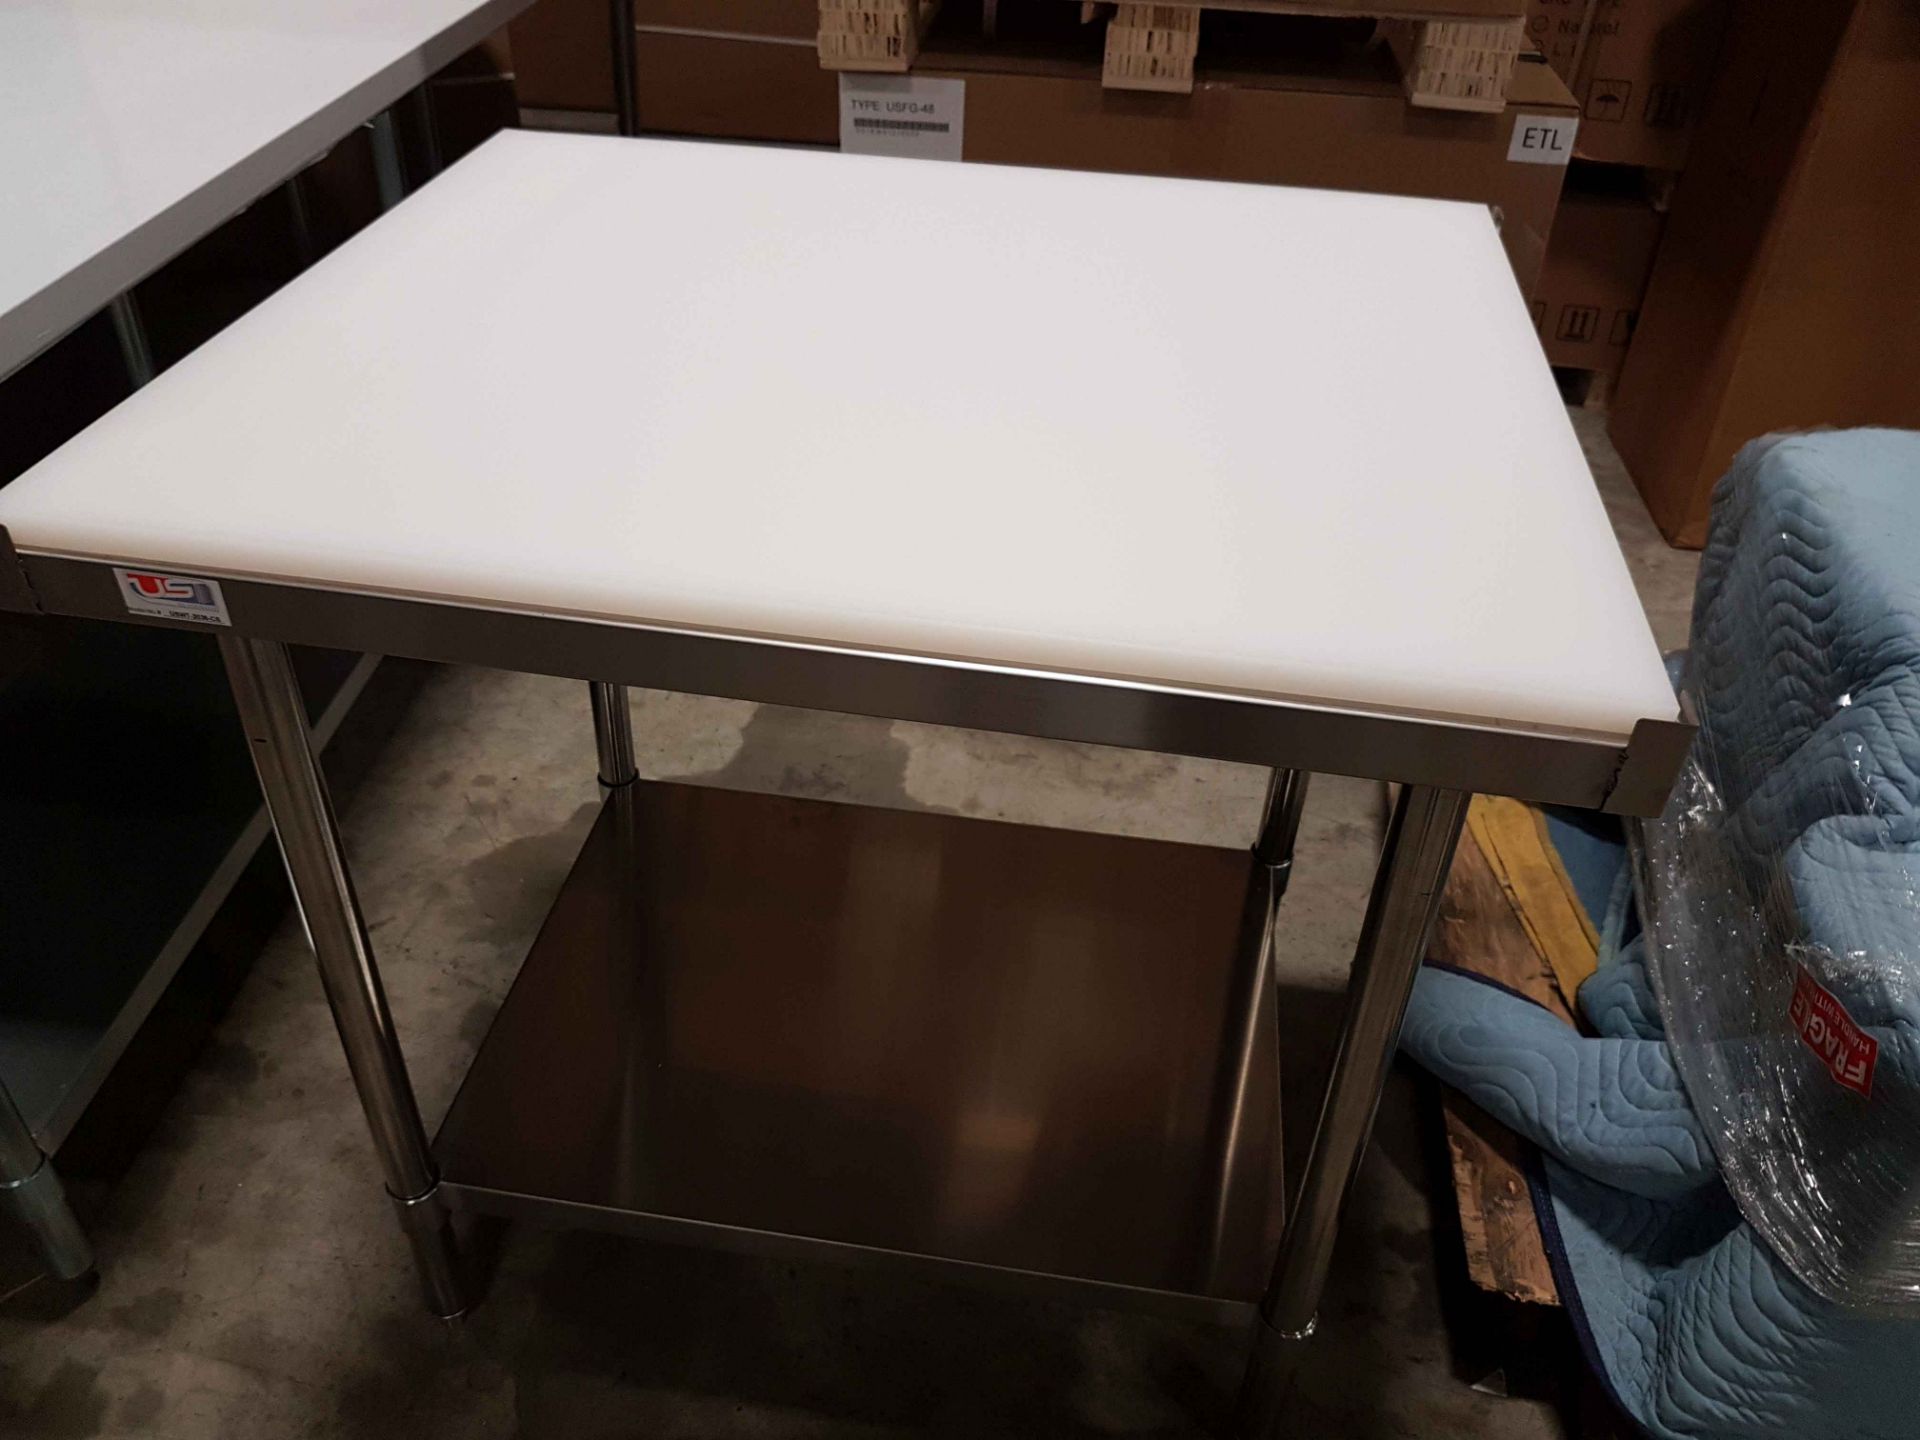 30" x 36" All Stainless Cutting Board Table - 1" Poly Top